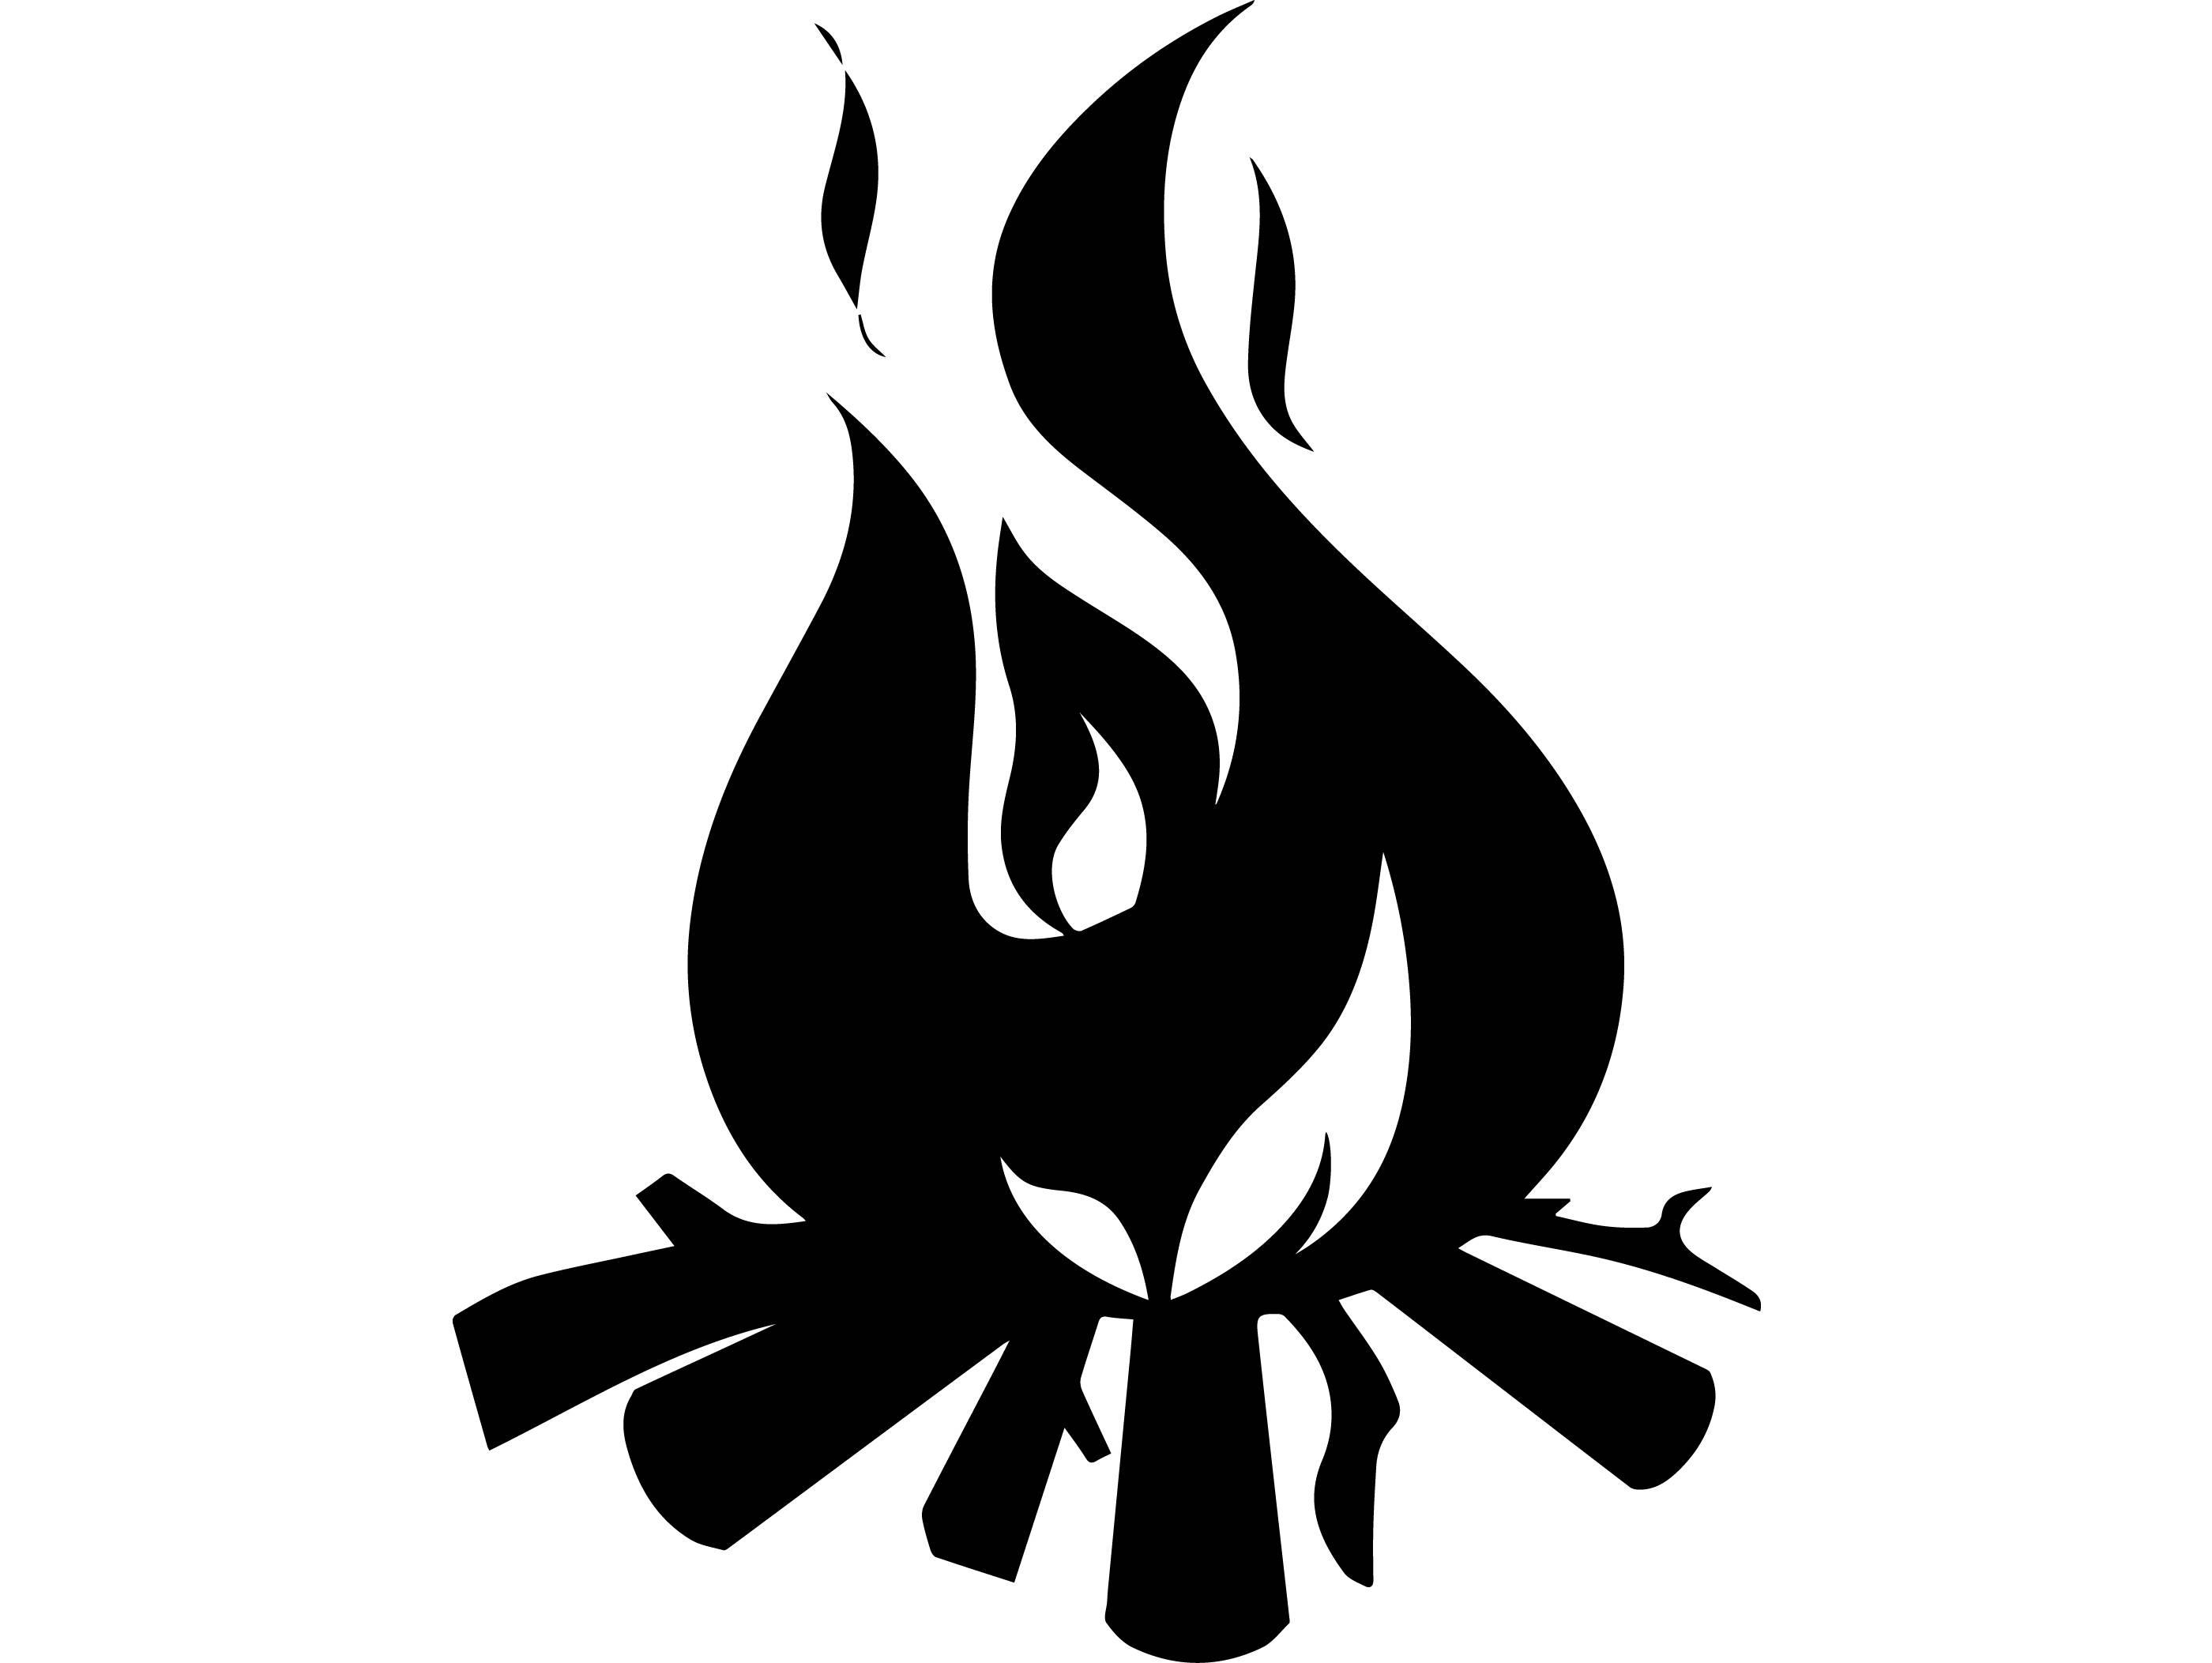 Campfire Silhouette Vector at Vectorified.com.